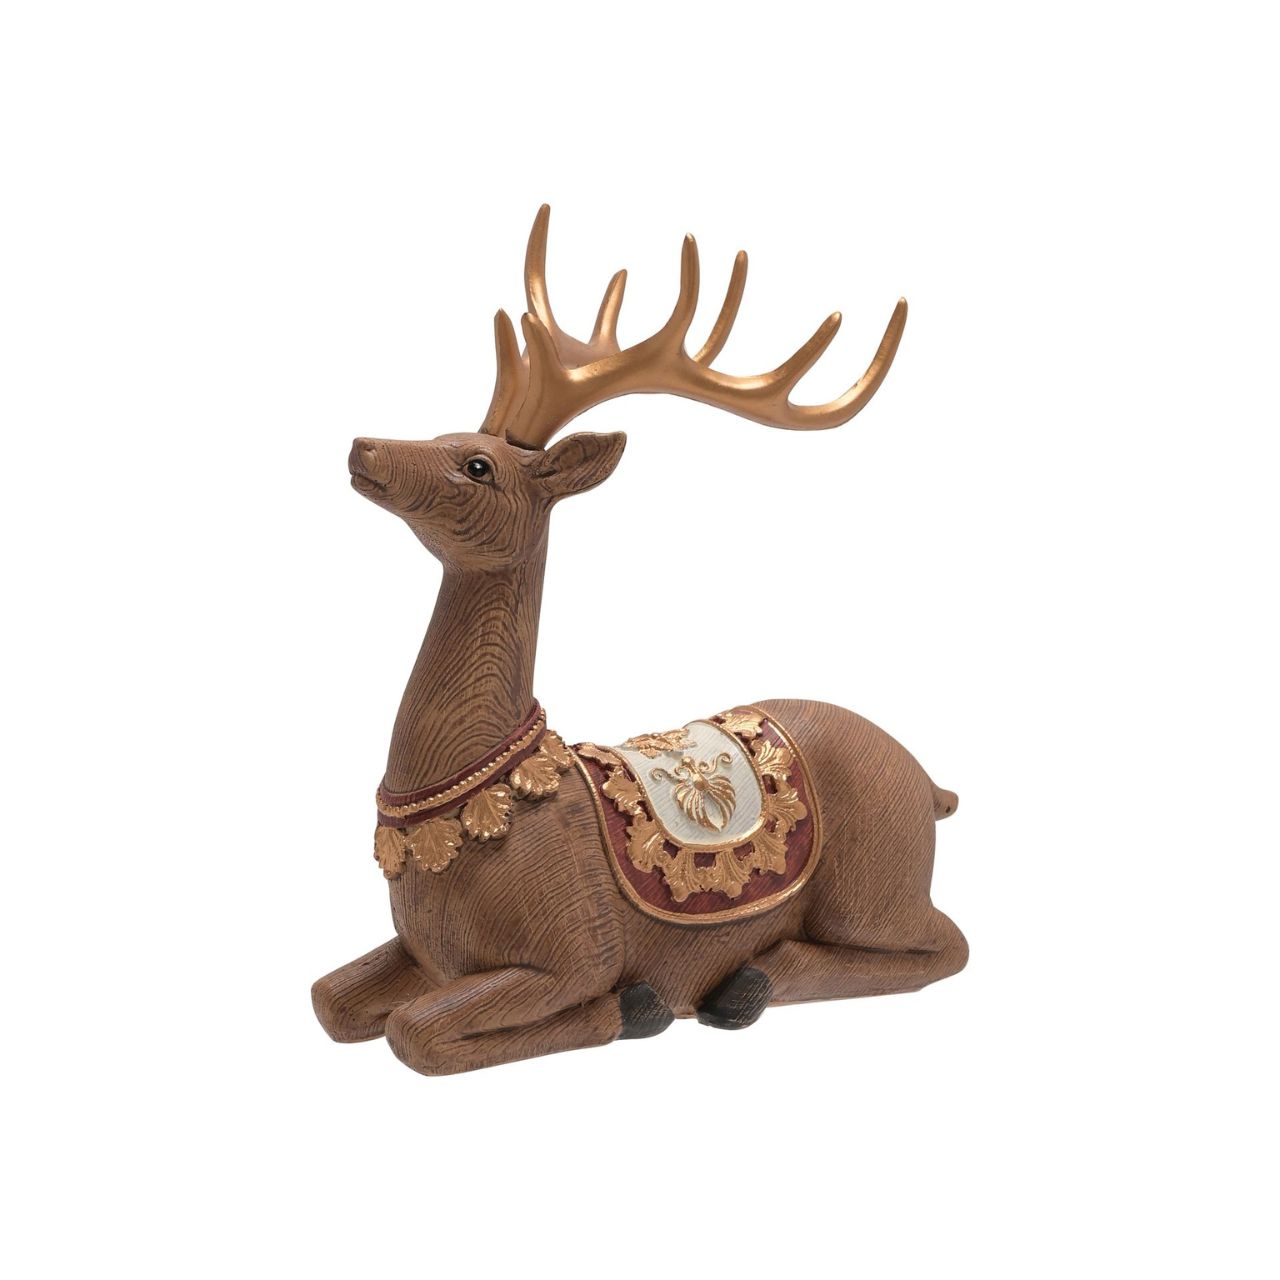 Christmas Sitting Reindeer Decoration  A Christmas sitting reindeer.  This charming Christmas decoration perfectly blends traditional and modern touches this festive season.